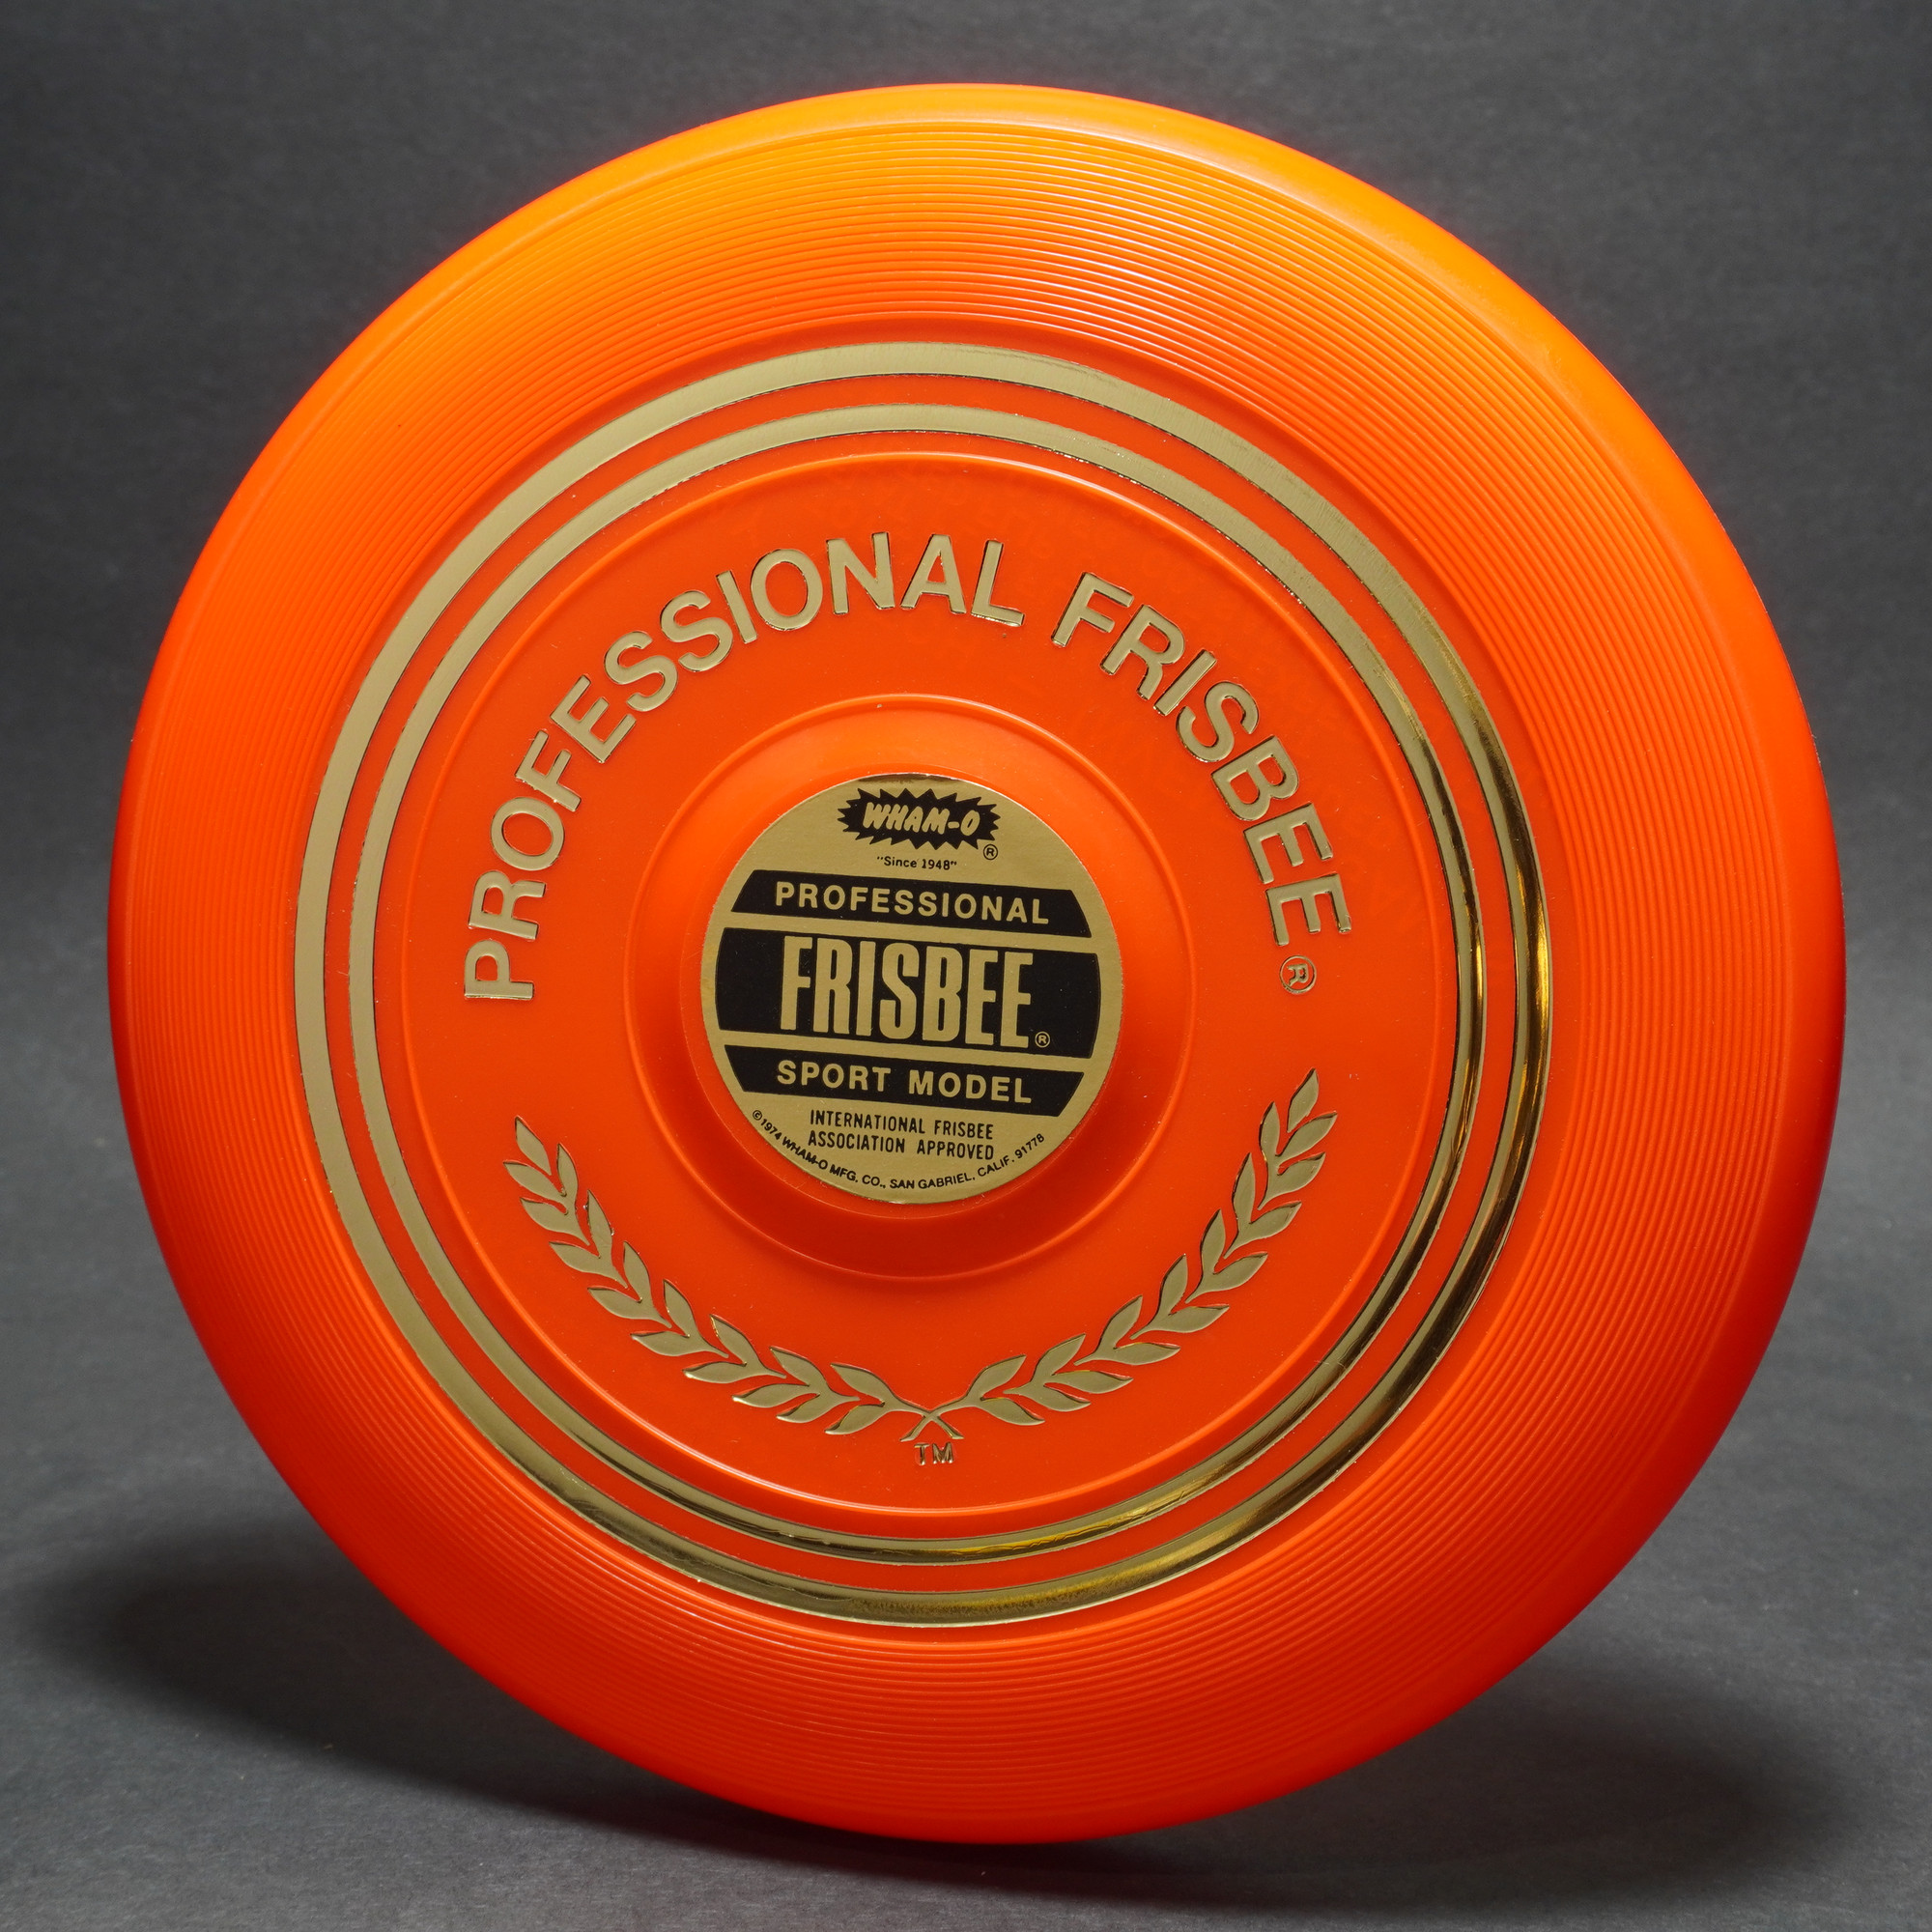 Indføre vask interview Classic Wham-O Pro Model Mold 15 Orange w/ Label - THE WRIGHT LIFE ACTION  SPORTING GOODS STORE